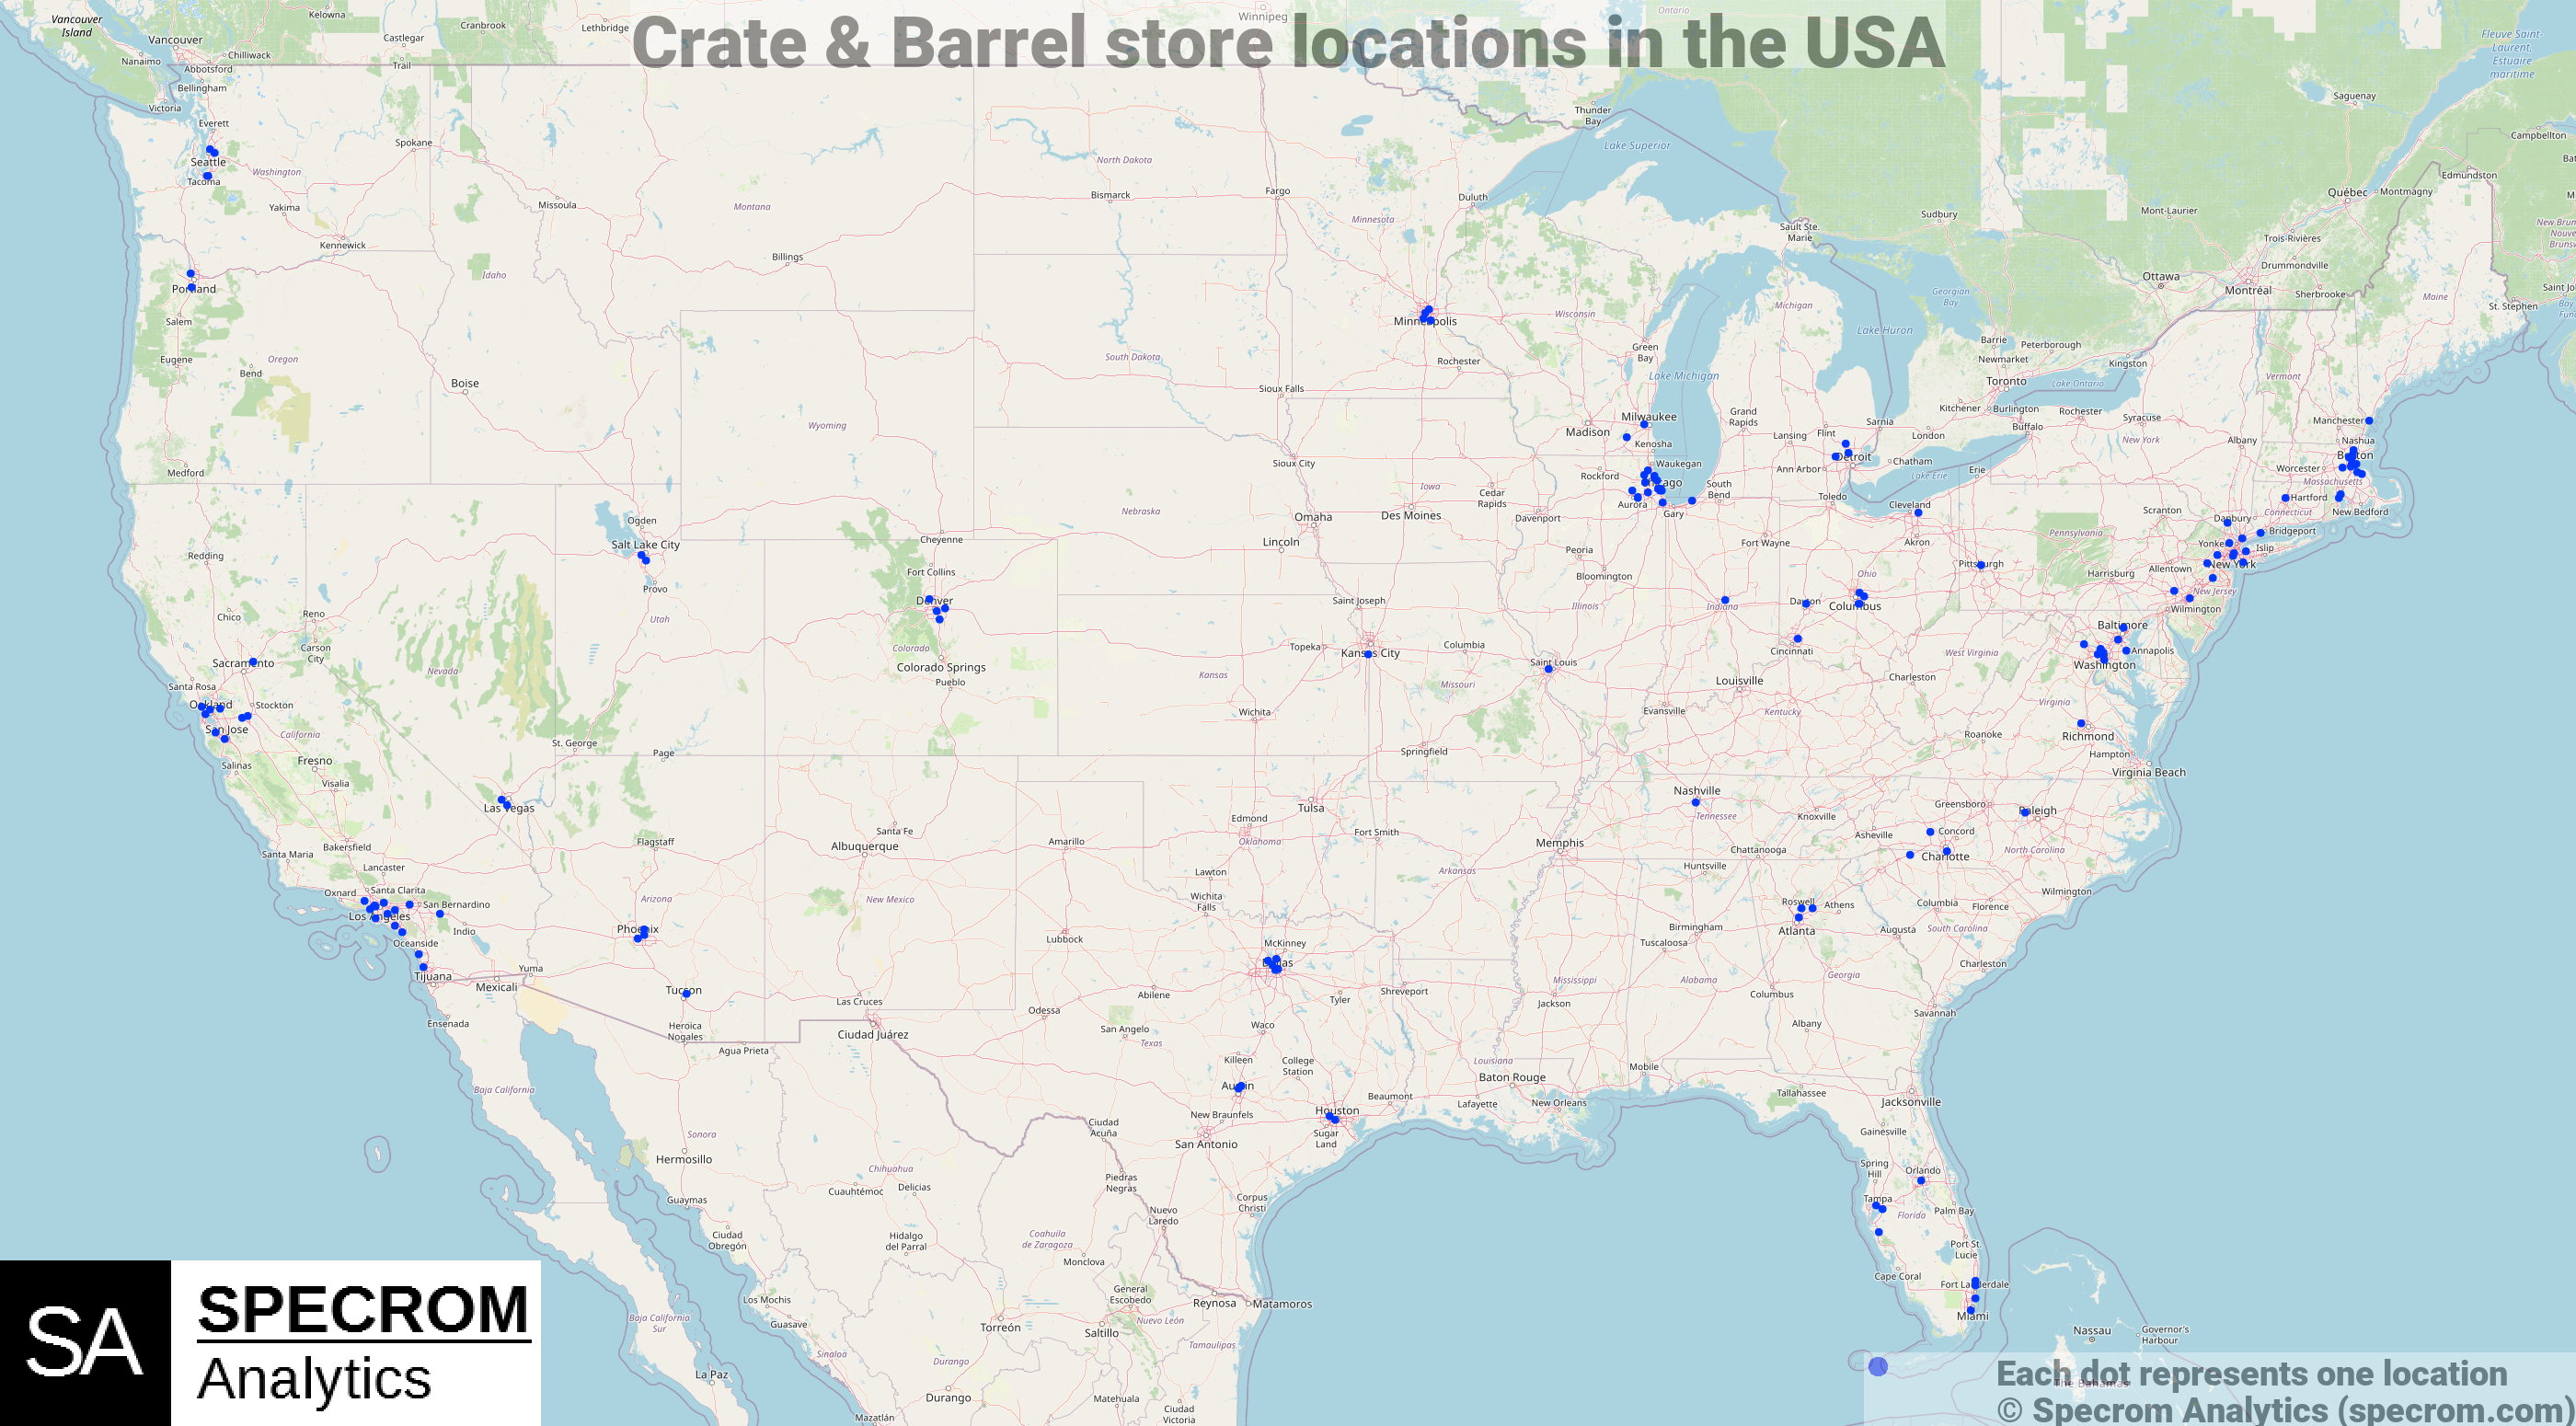 Crate & Barrel store locations in the USA